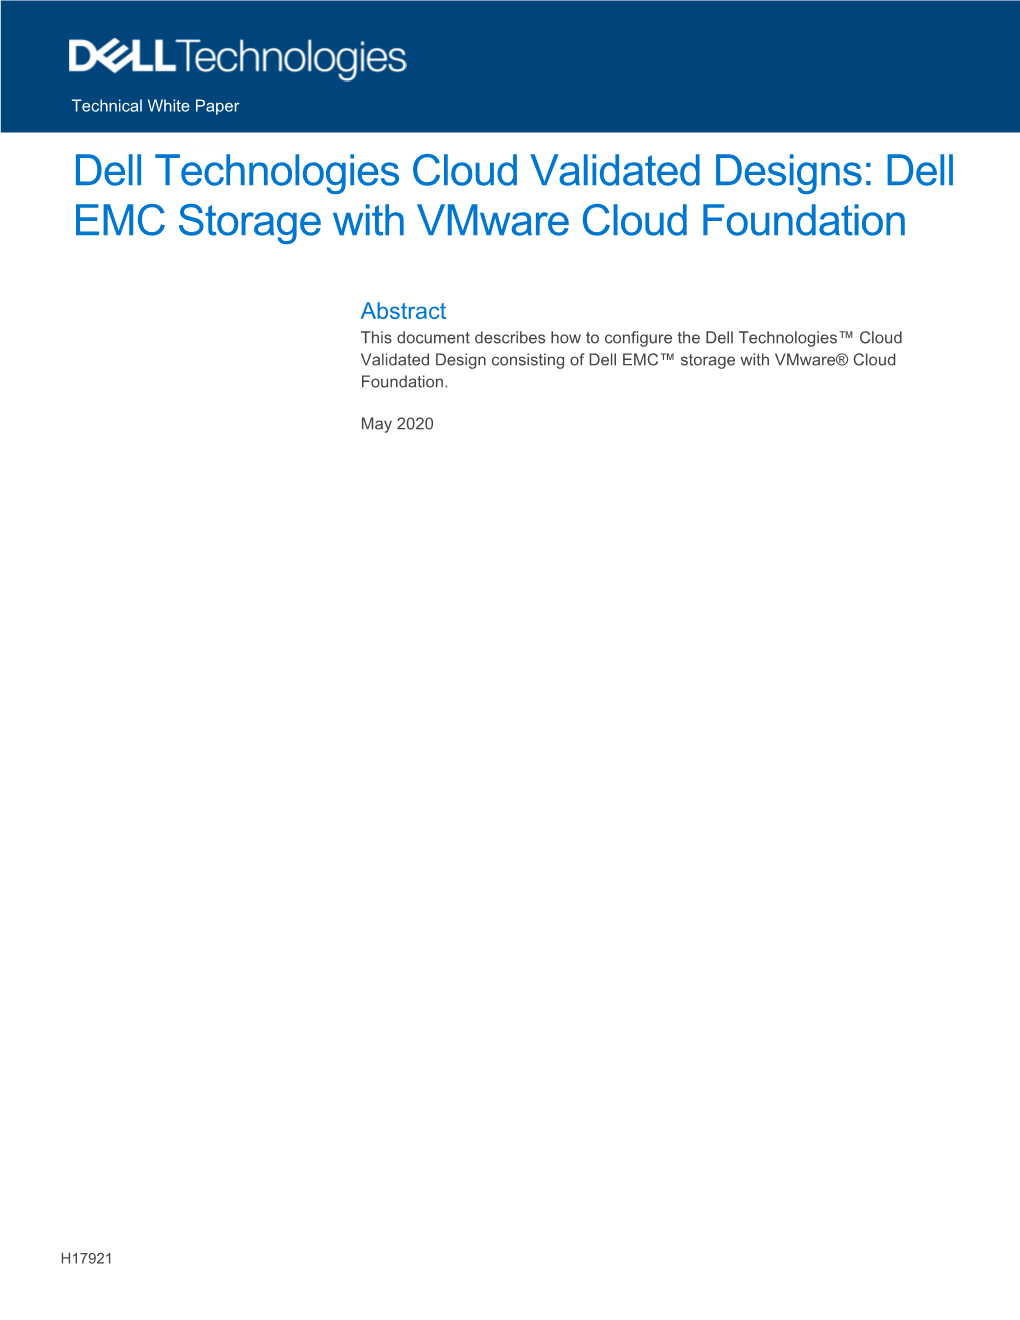 Dell Technologies Cloud Validated Designs: Dell EMC Storage with Vmware Cloud Foundation